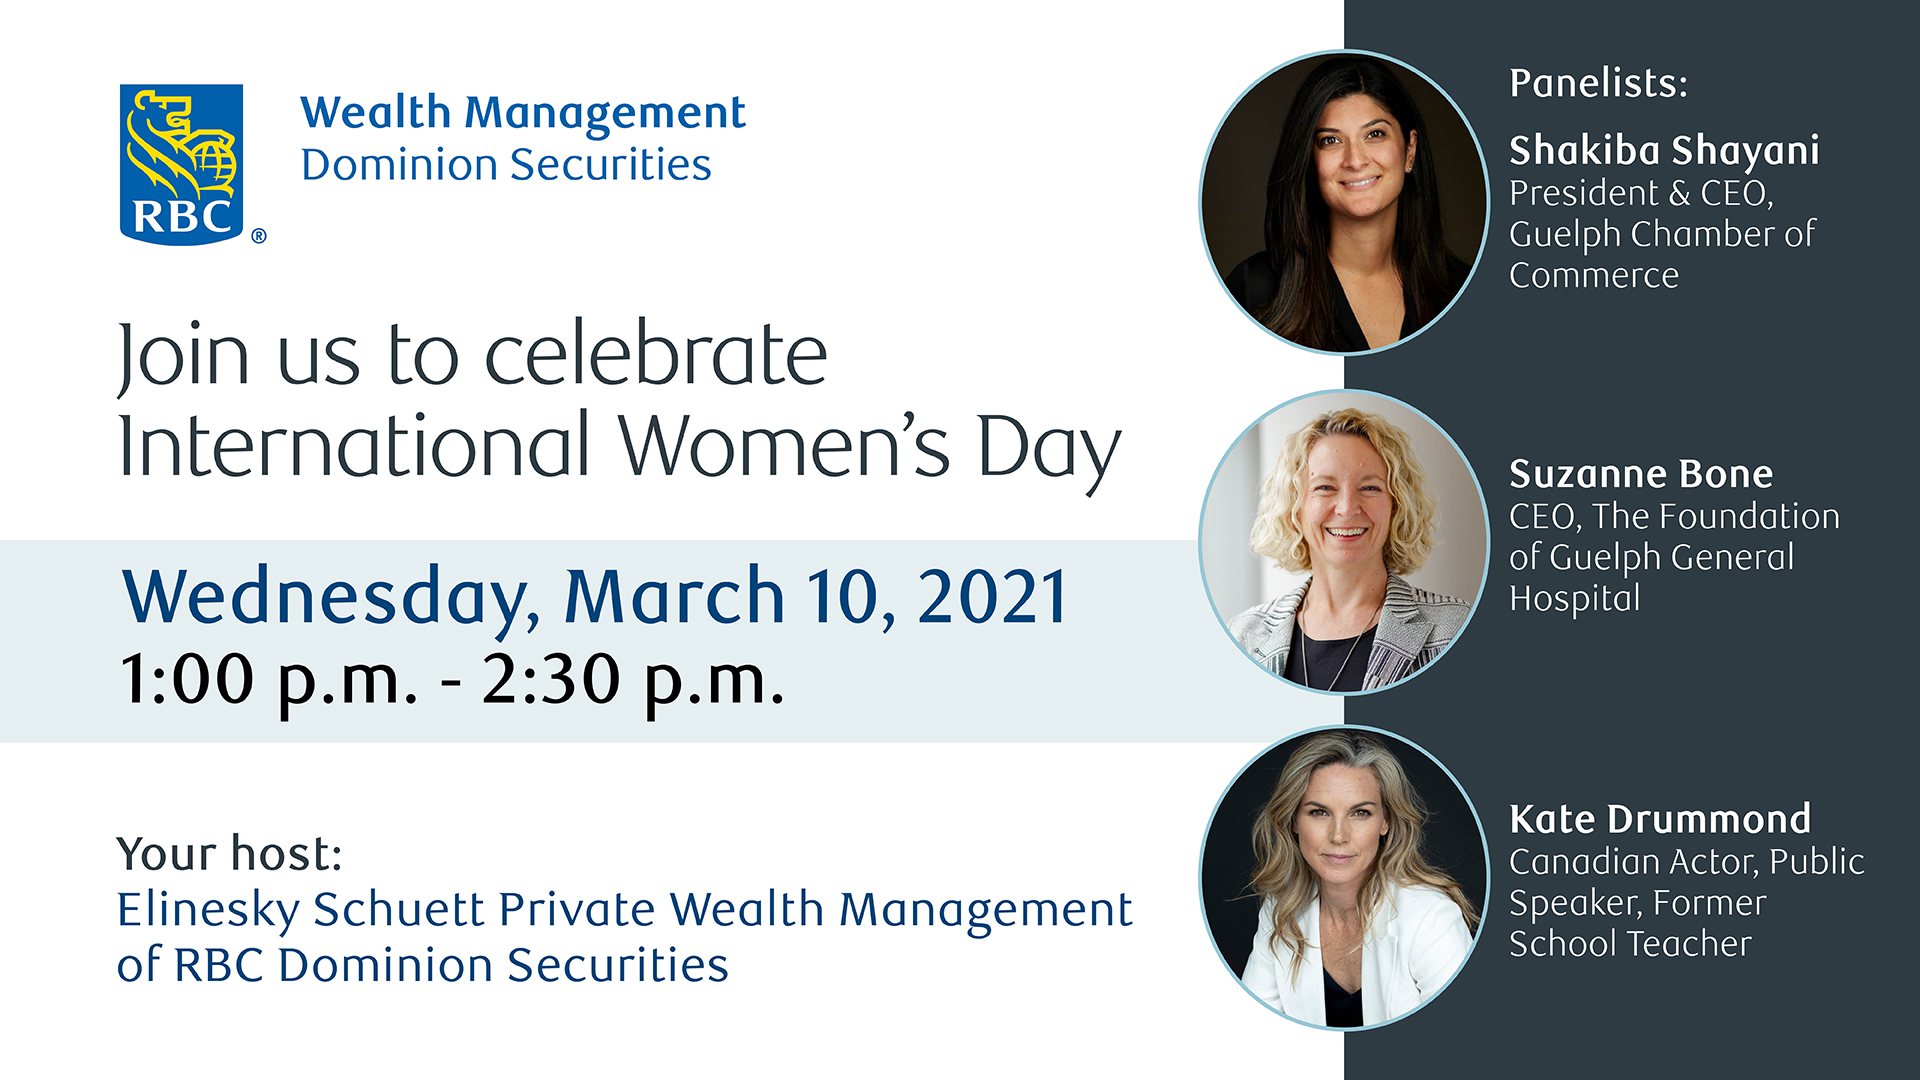 Image of three women on a white background with the following text: Join us to celebrate International Women's Day. Choose to challenge. Wednesday, March 10, 2021, 1:00 p.m. - 2:30 p.m. Online, via WebEx. Panelists.